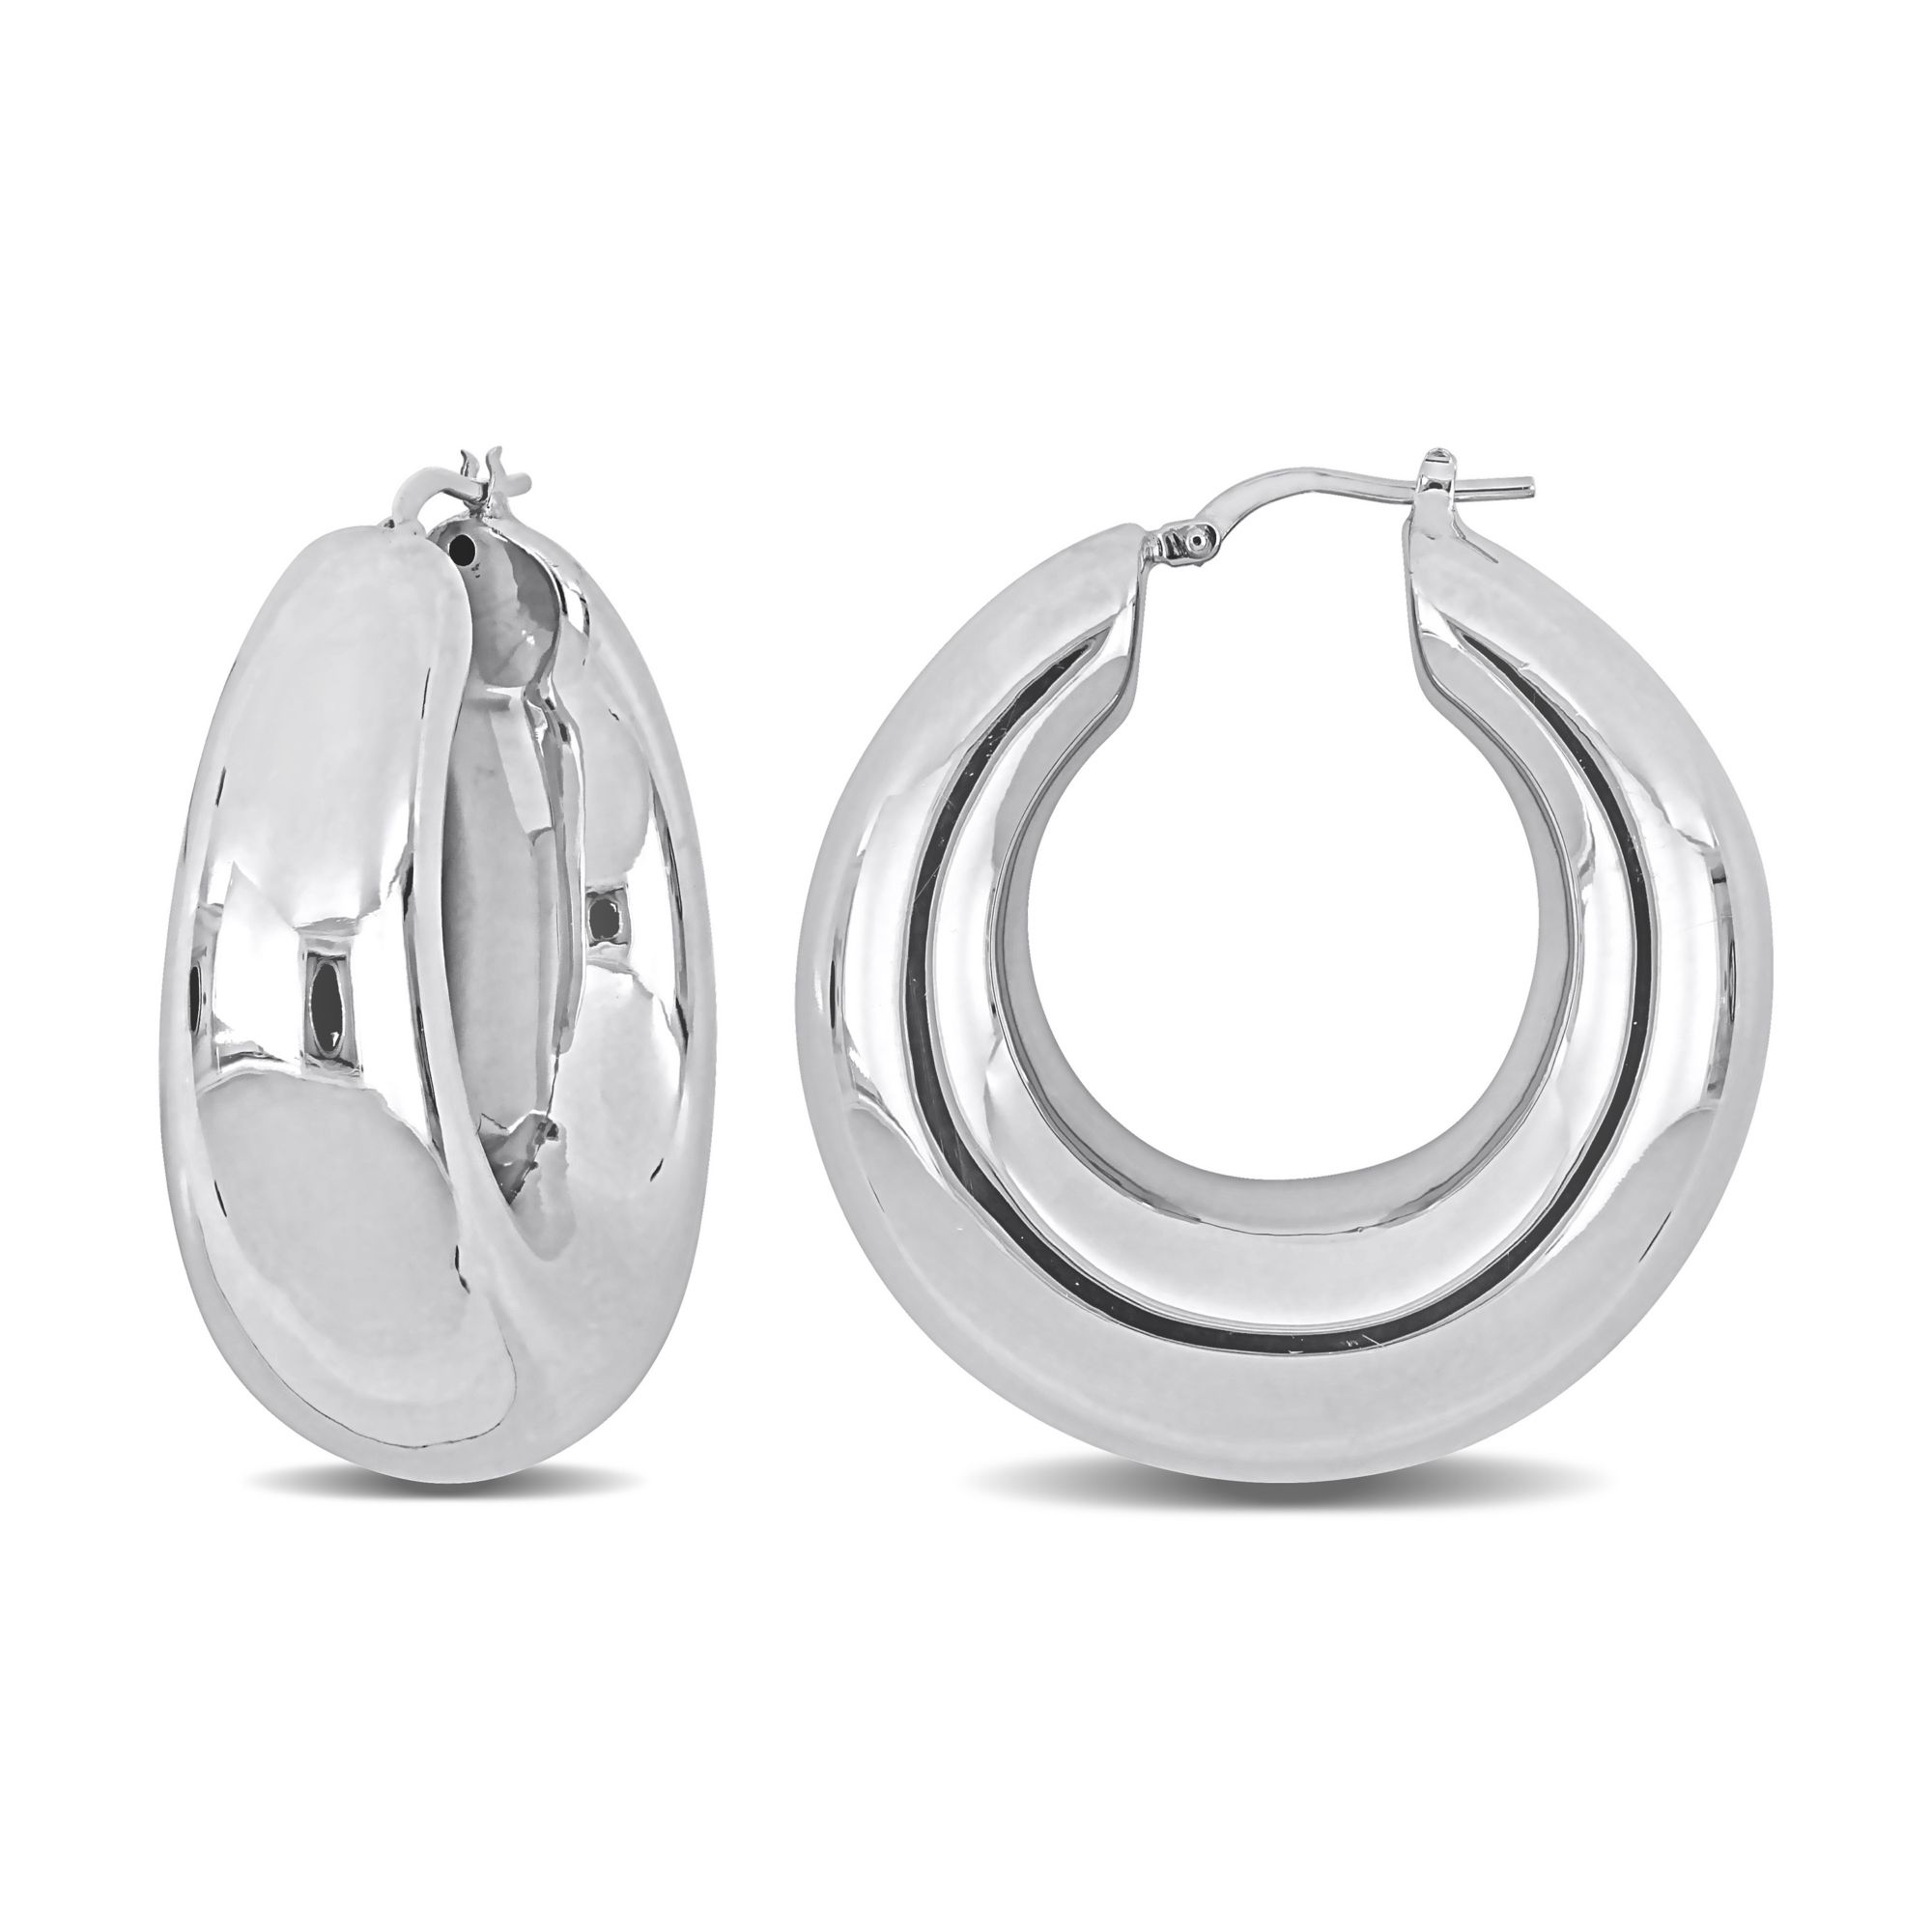 Invest In Stainless Steel Jewelry Findings For A New, Classy Collection 